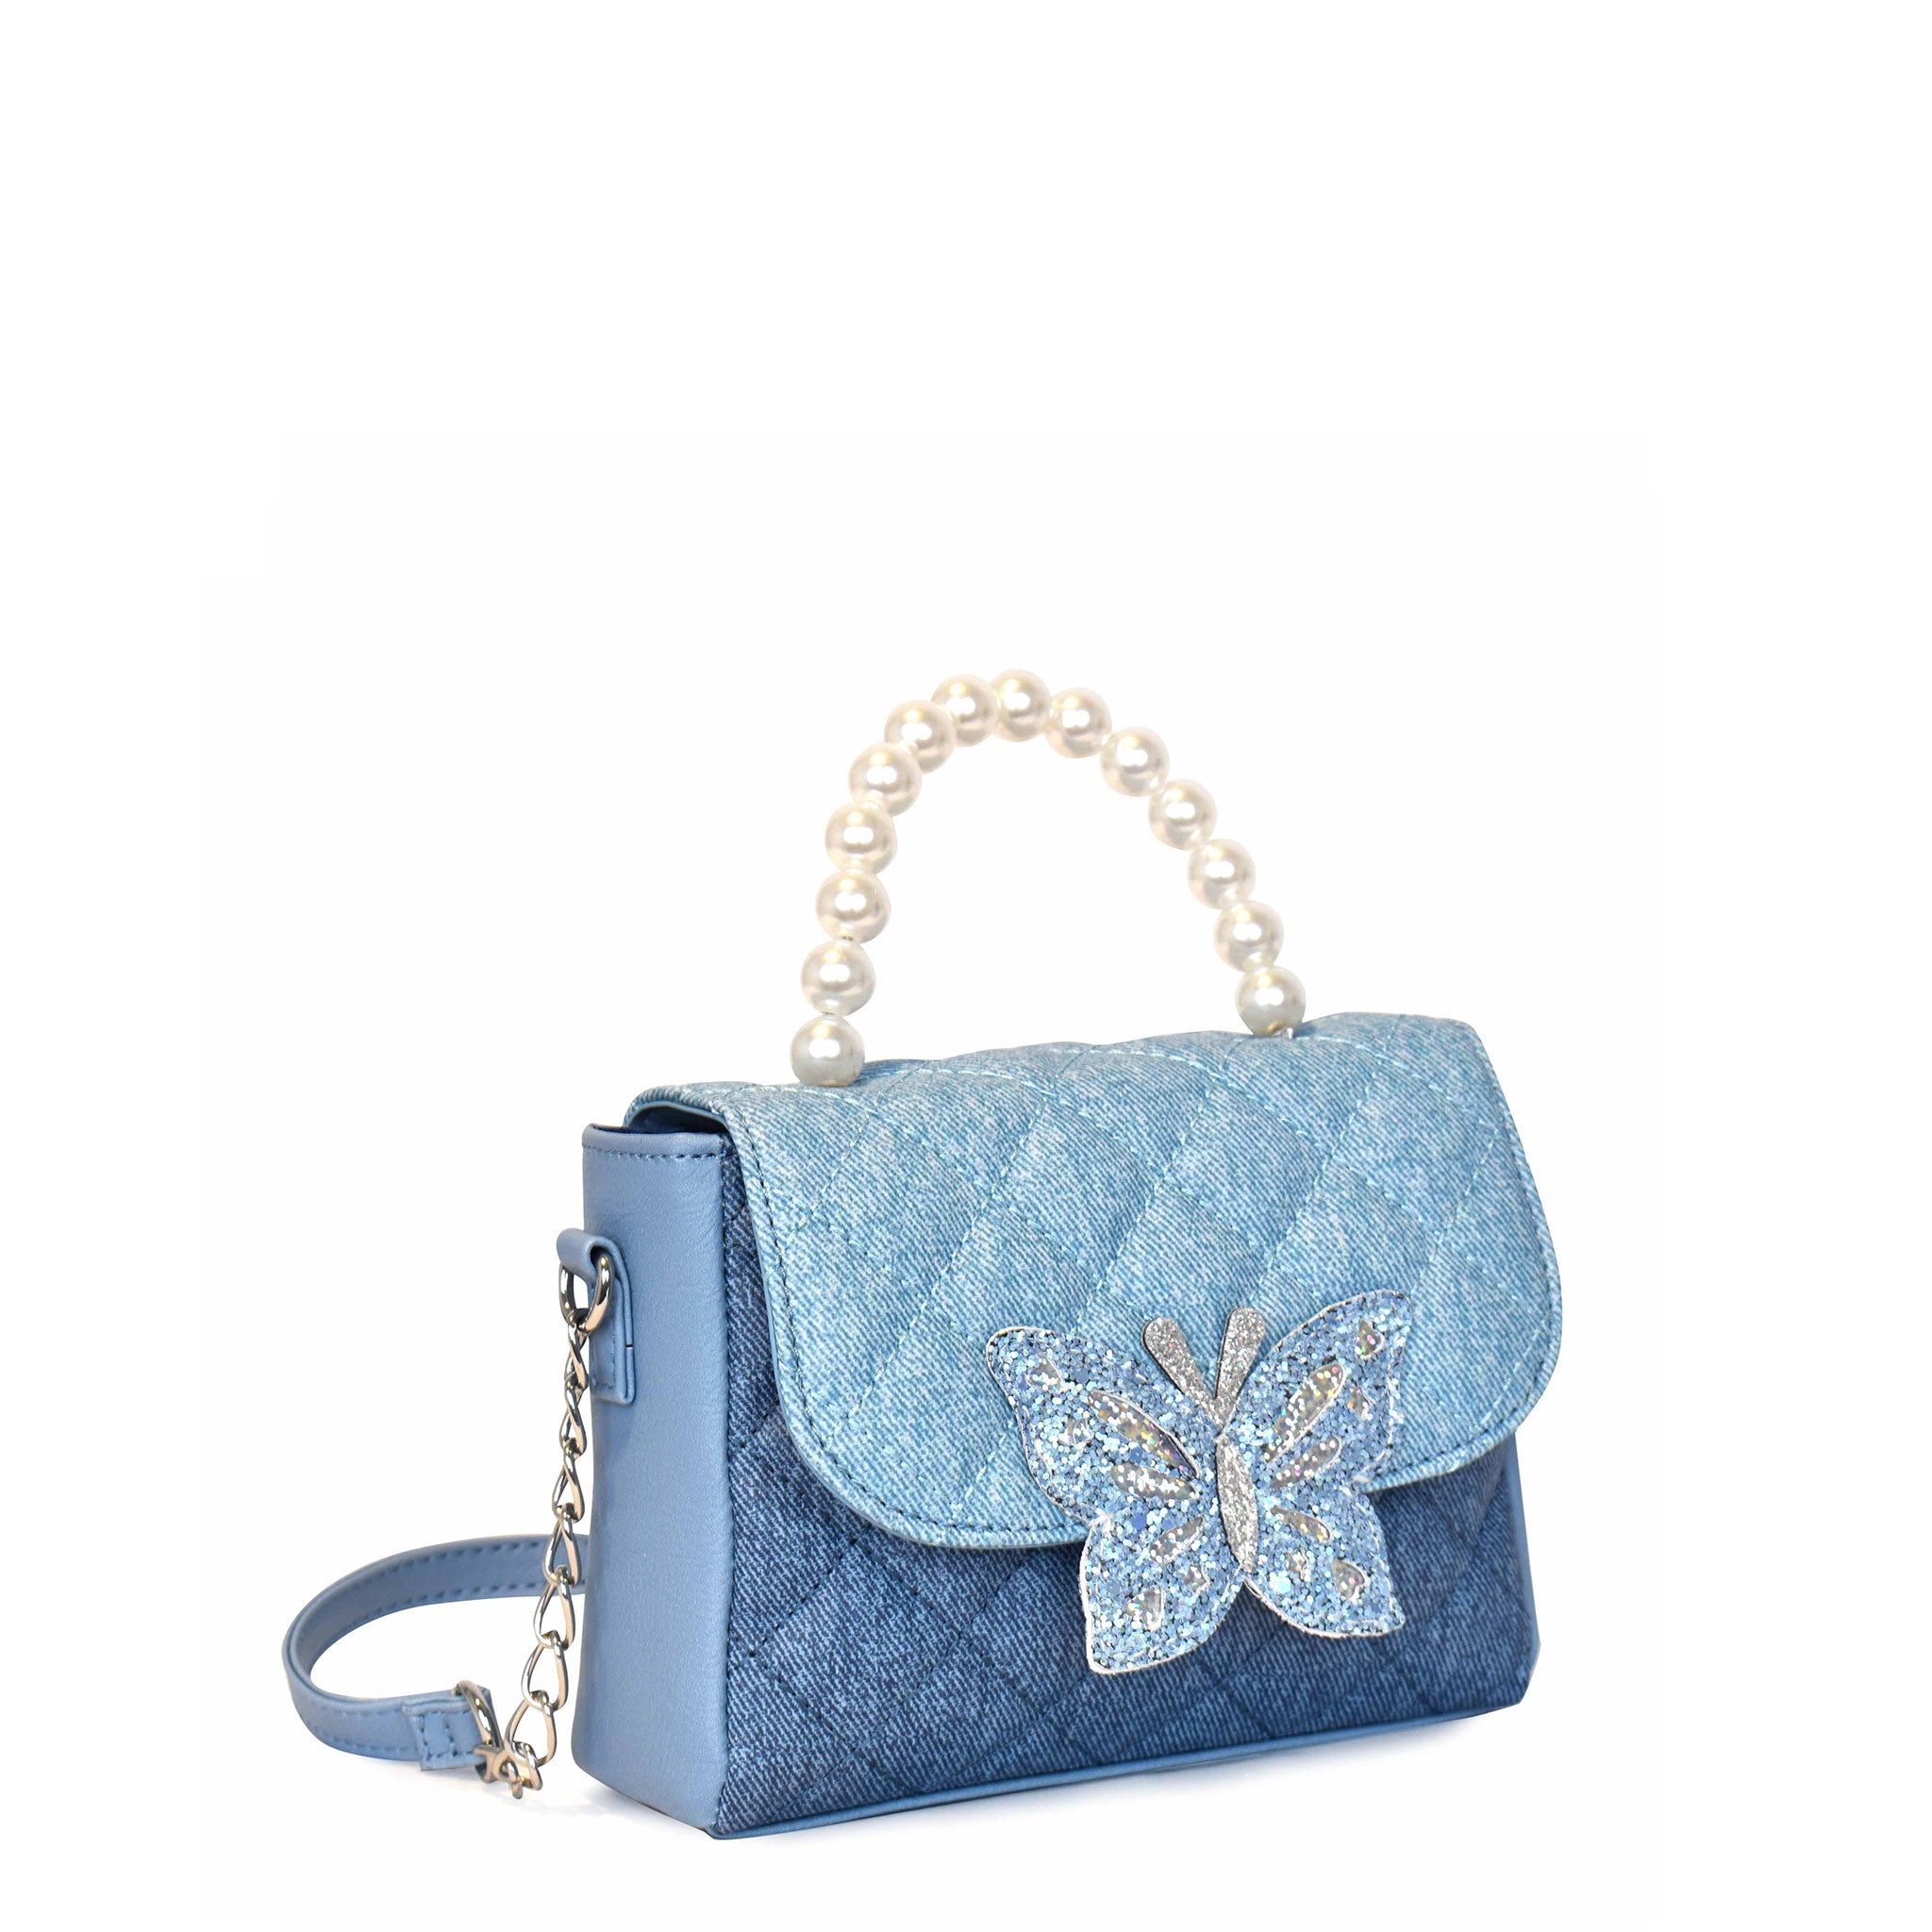 Side view of a two-toned denim quilted flap top crossbody with a pearl top handle and glitter butterfly closure button patch